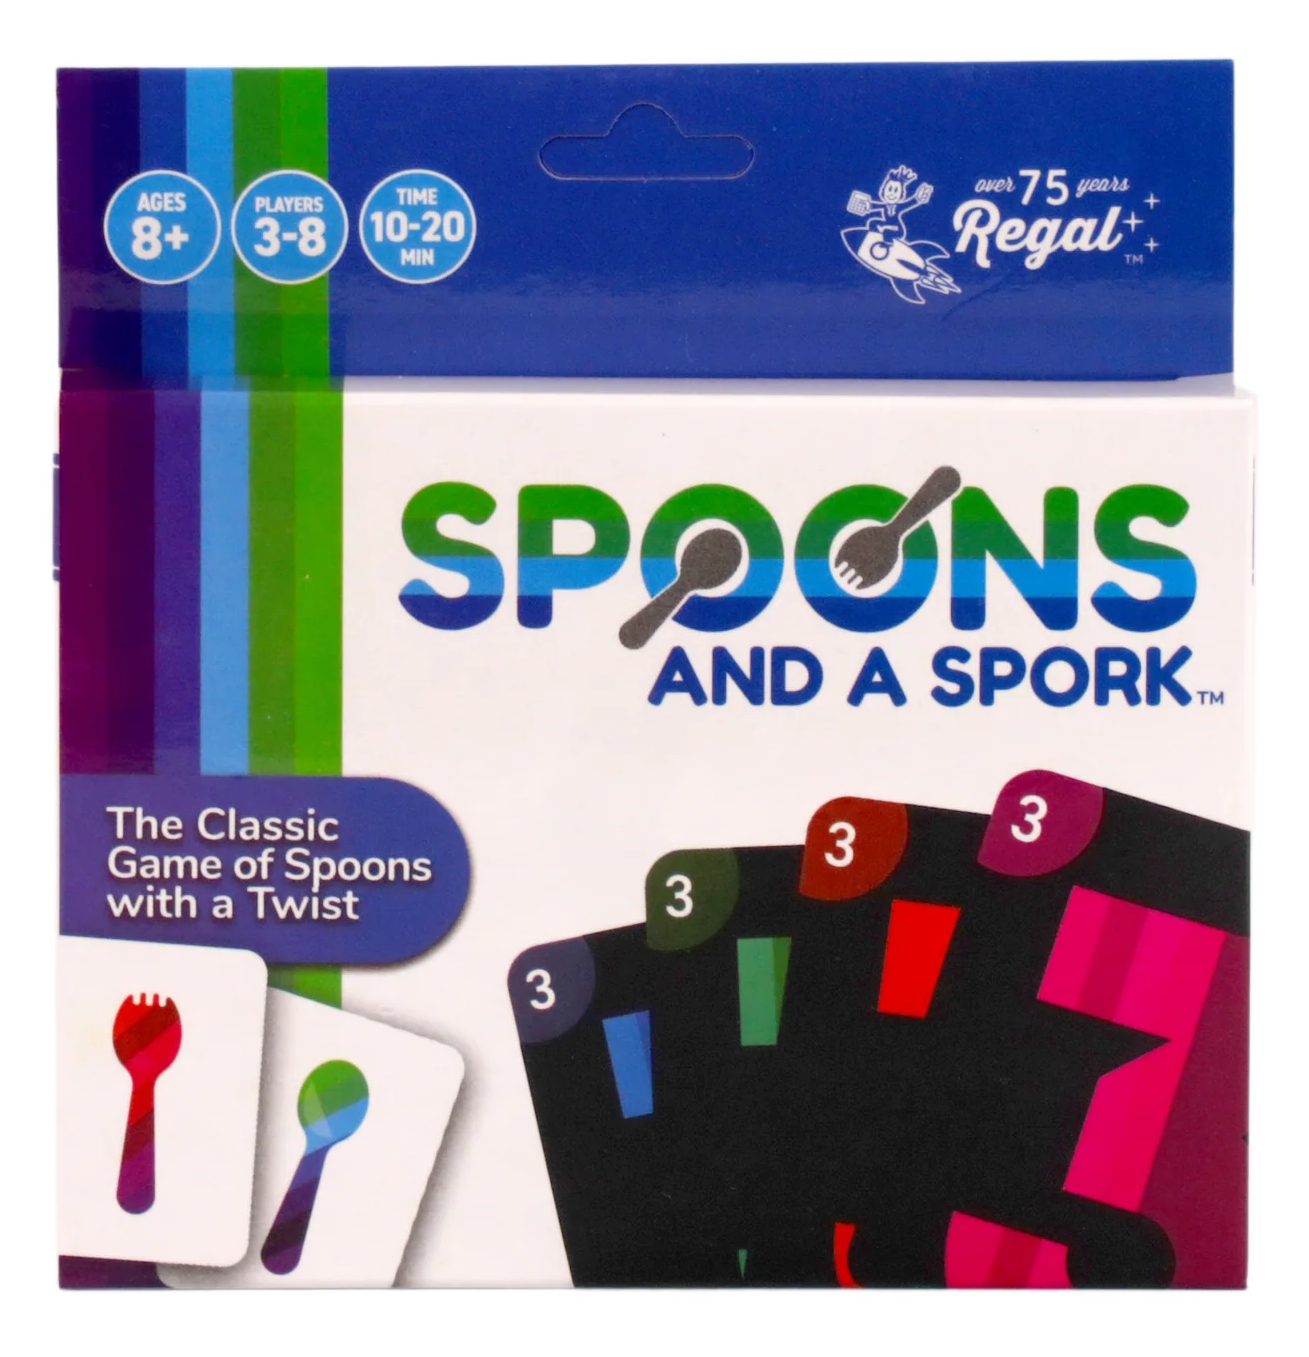 Spoons and a Spork